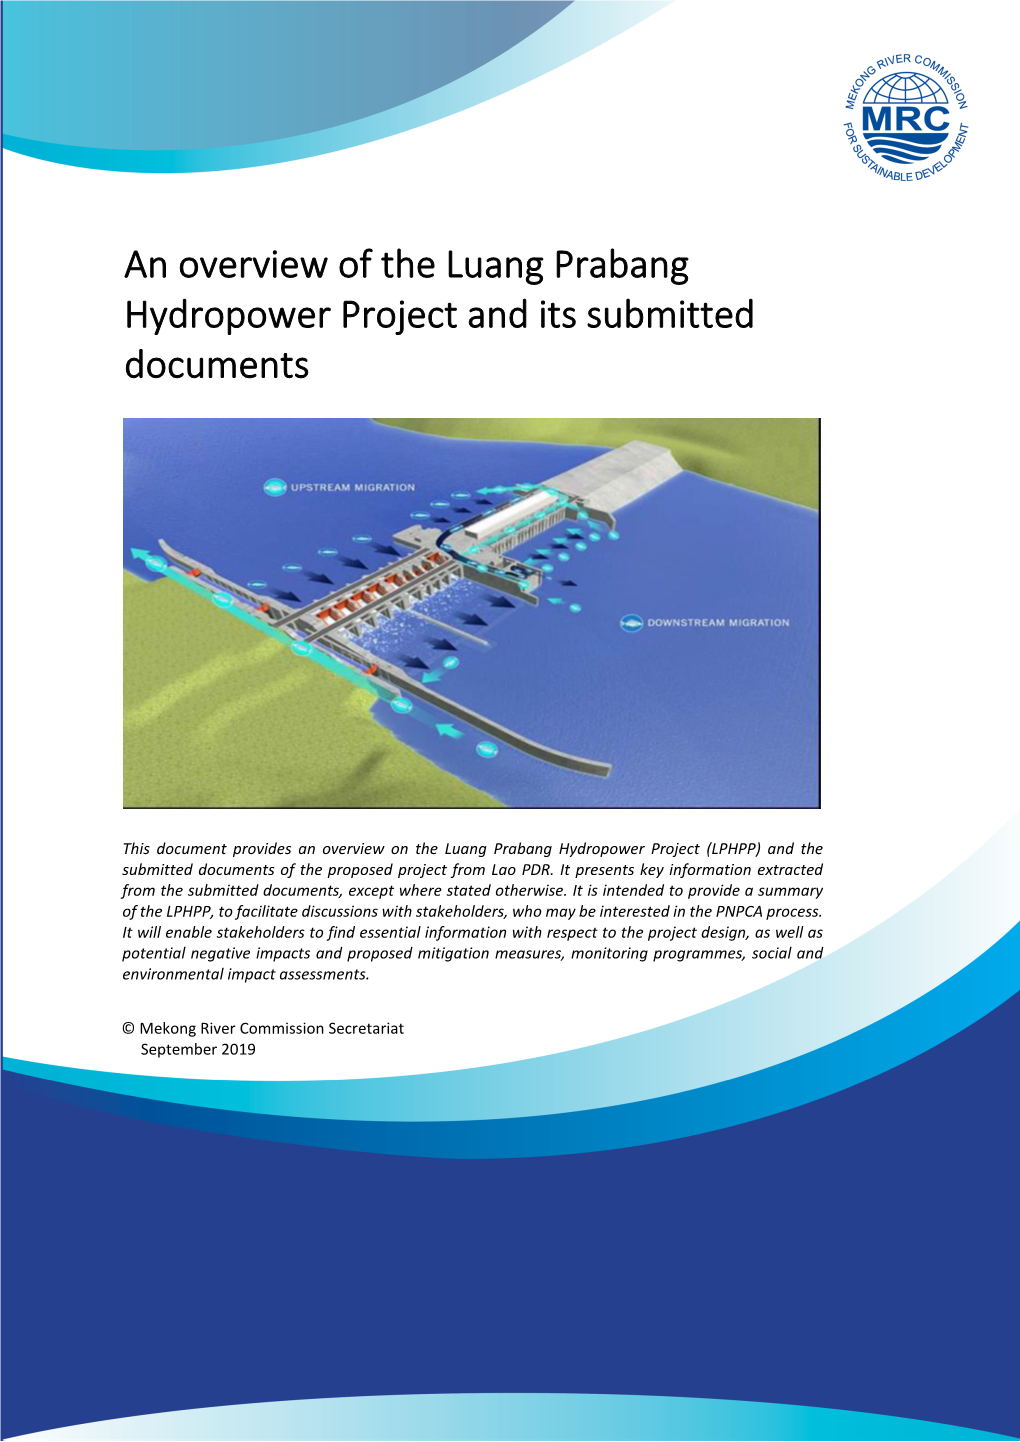 Luang Prabang Hydropower Project and Its Submitted Documents